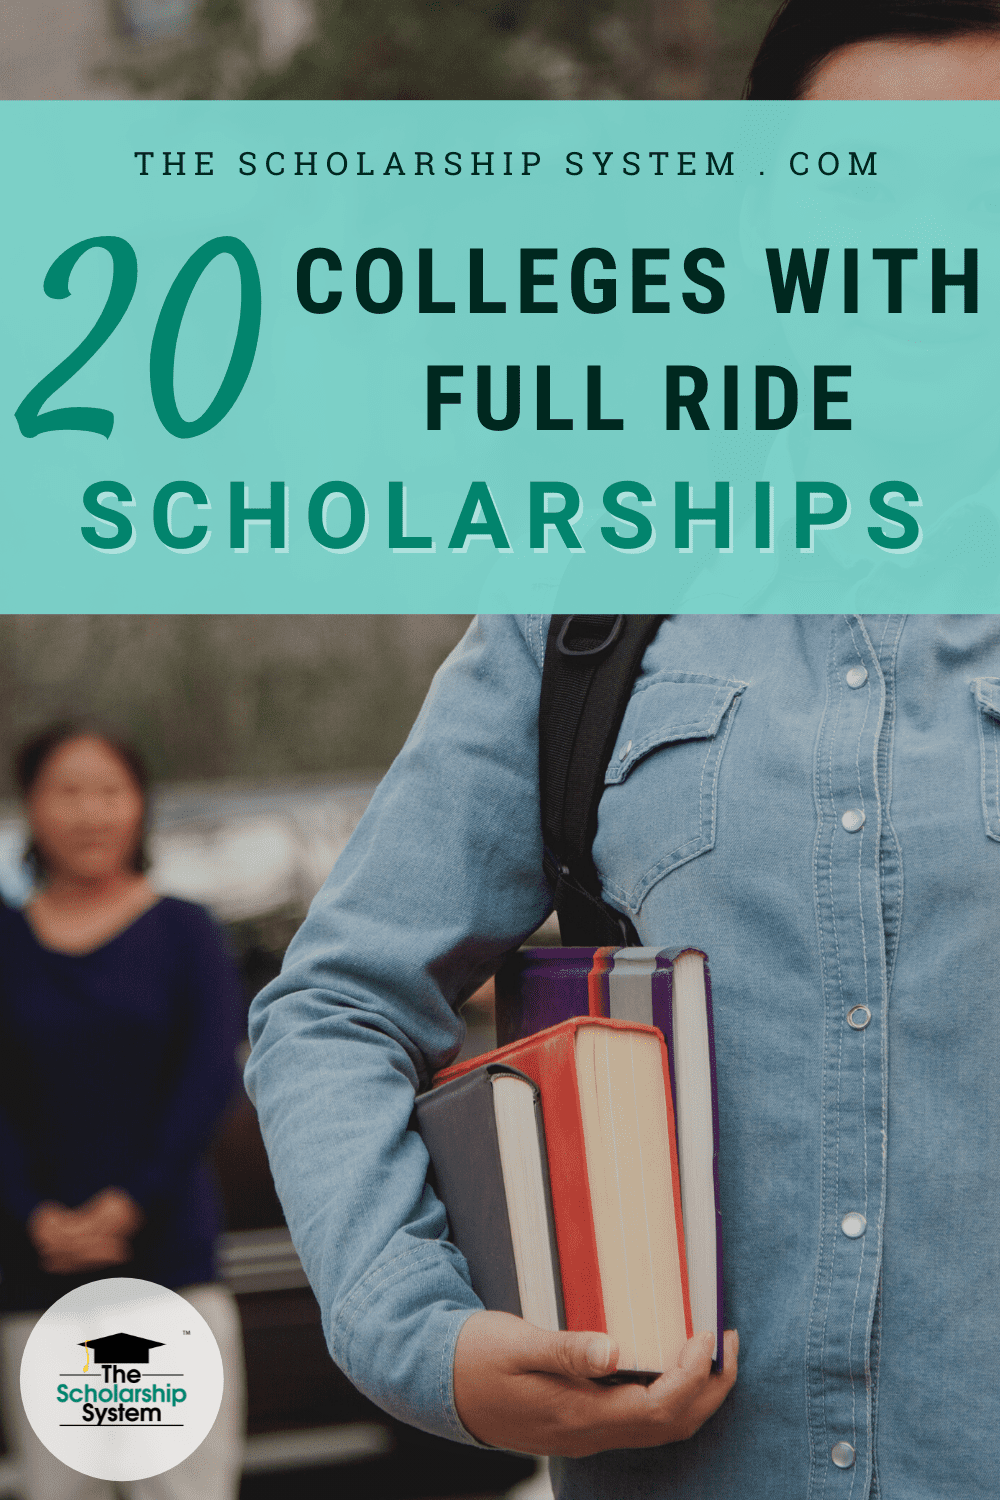 20 Colleges with Full Ride Scholarships The Scholarship System